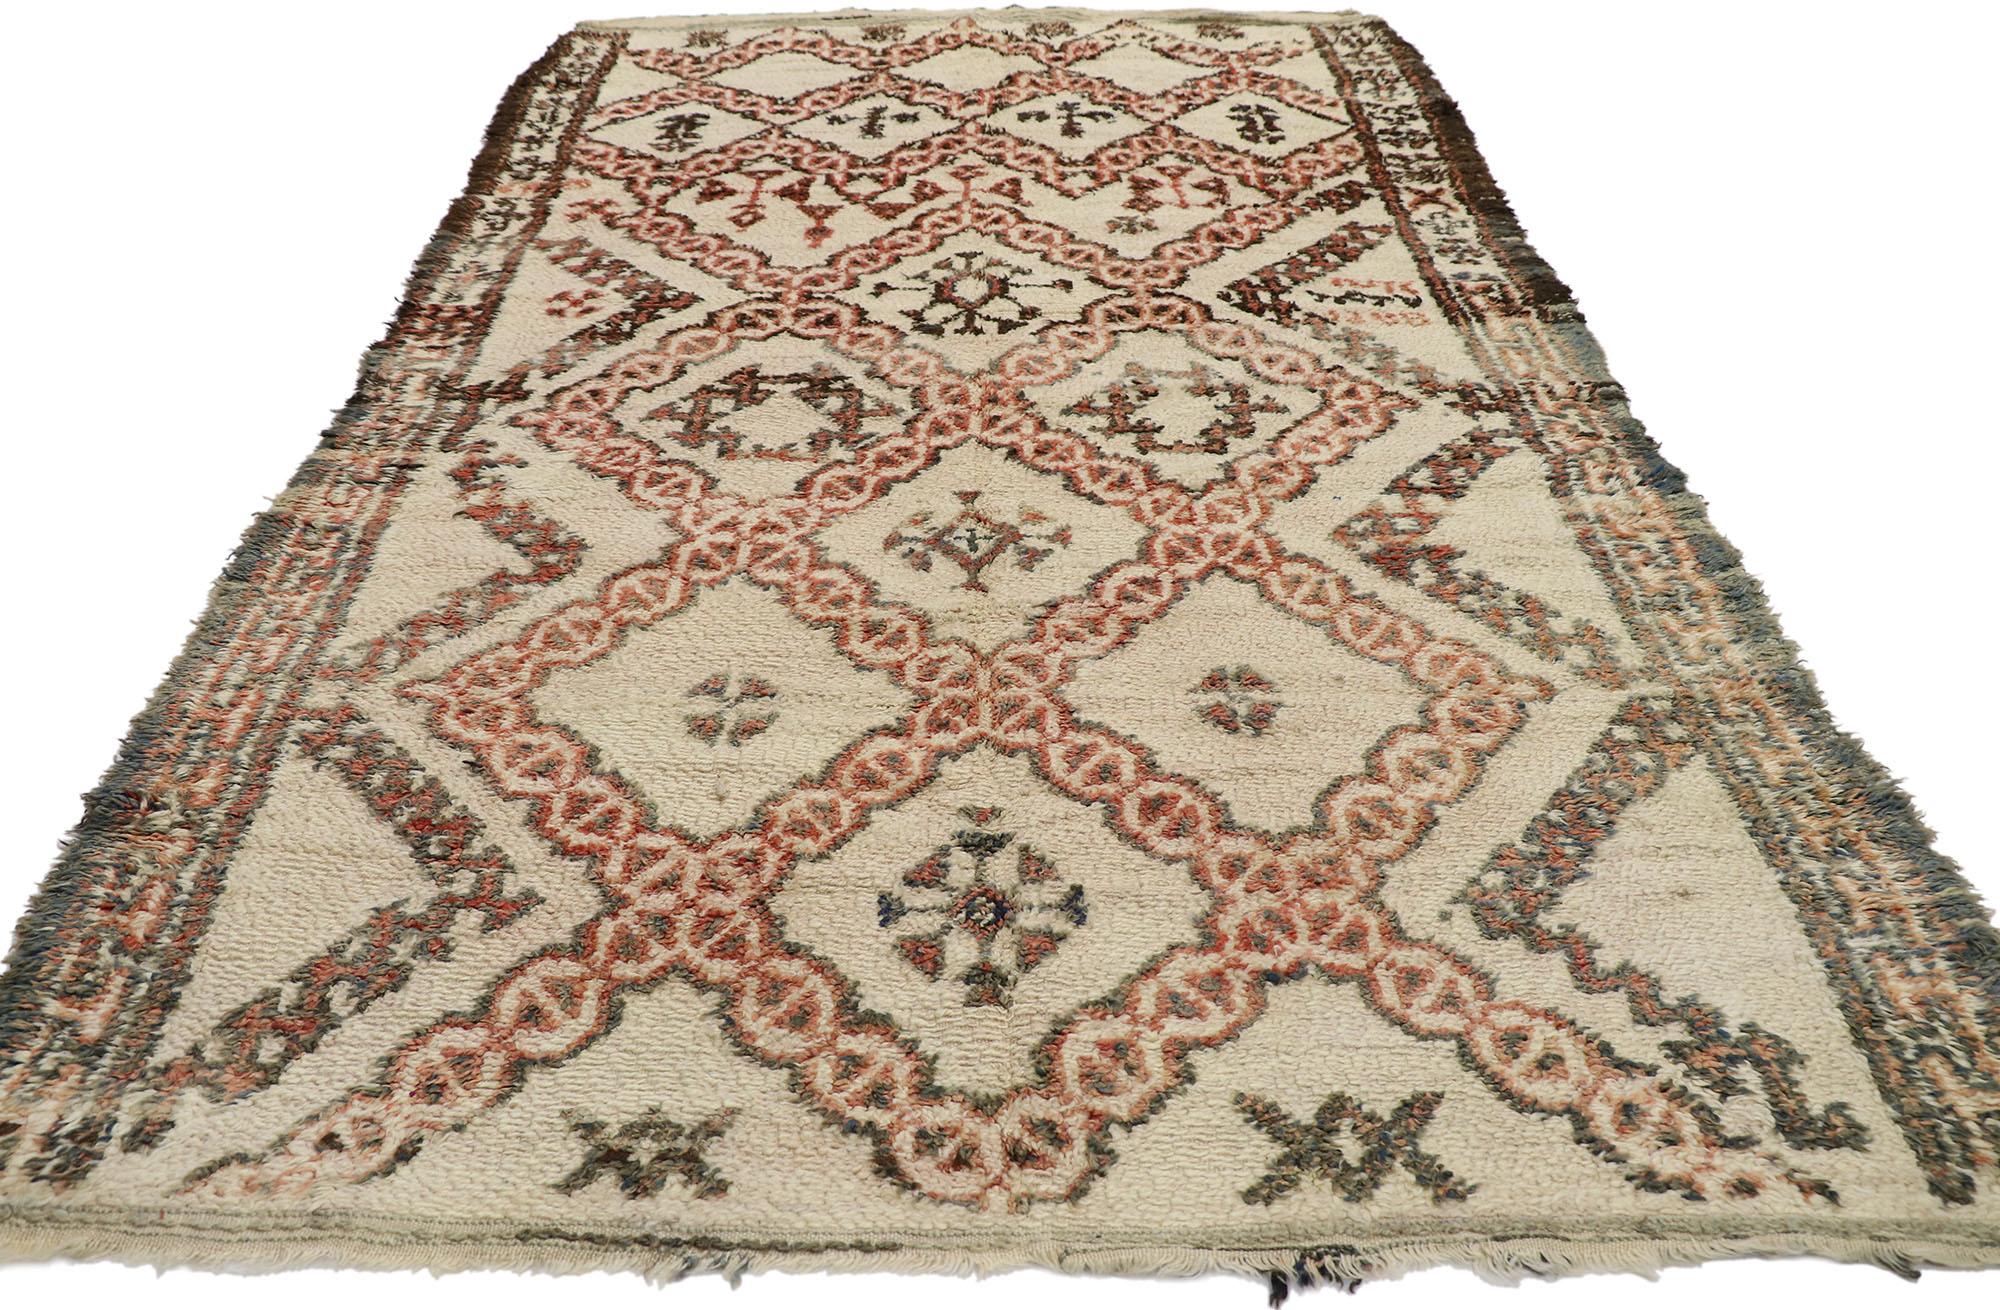 21382 Vintage Berber Moroccan Beni Ourain Rug, 05'07 x 09'03. Originating from the esteemed Beni Ourain tribe in Morocco, these meticulously crafted rugs honor tradition with meticulous attention to detail, utilizing untreated sheep's wool to infuse